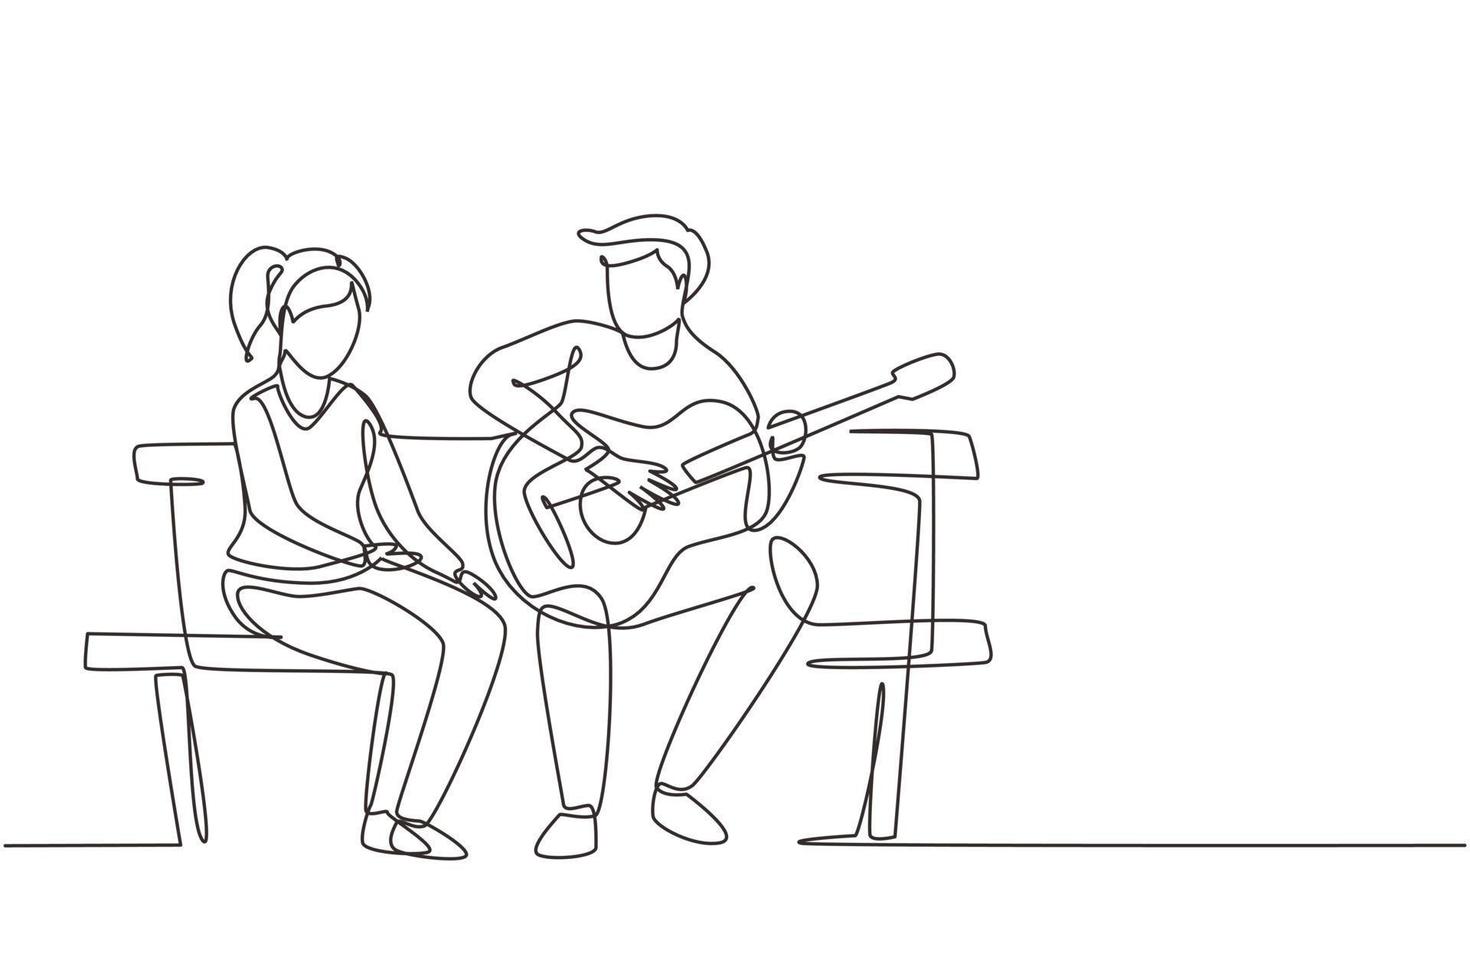 Single continuous line drawing people sitting on wooden bench in park. Couple on date, man playing music on guitar, girl listen and singing together. One line draw graphic design vector illustration